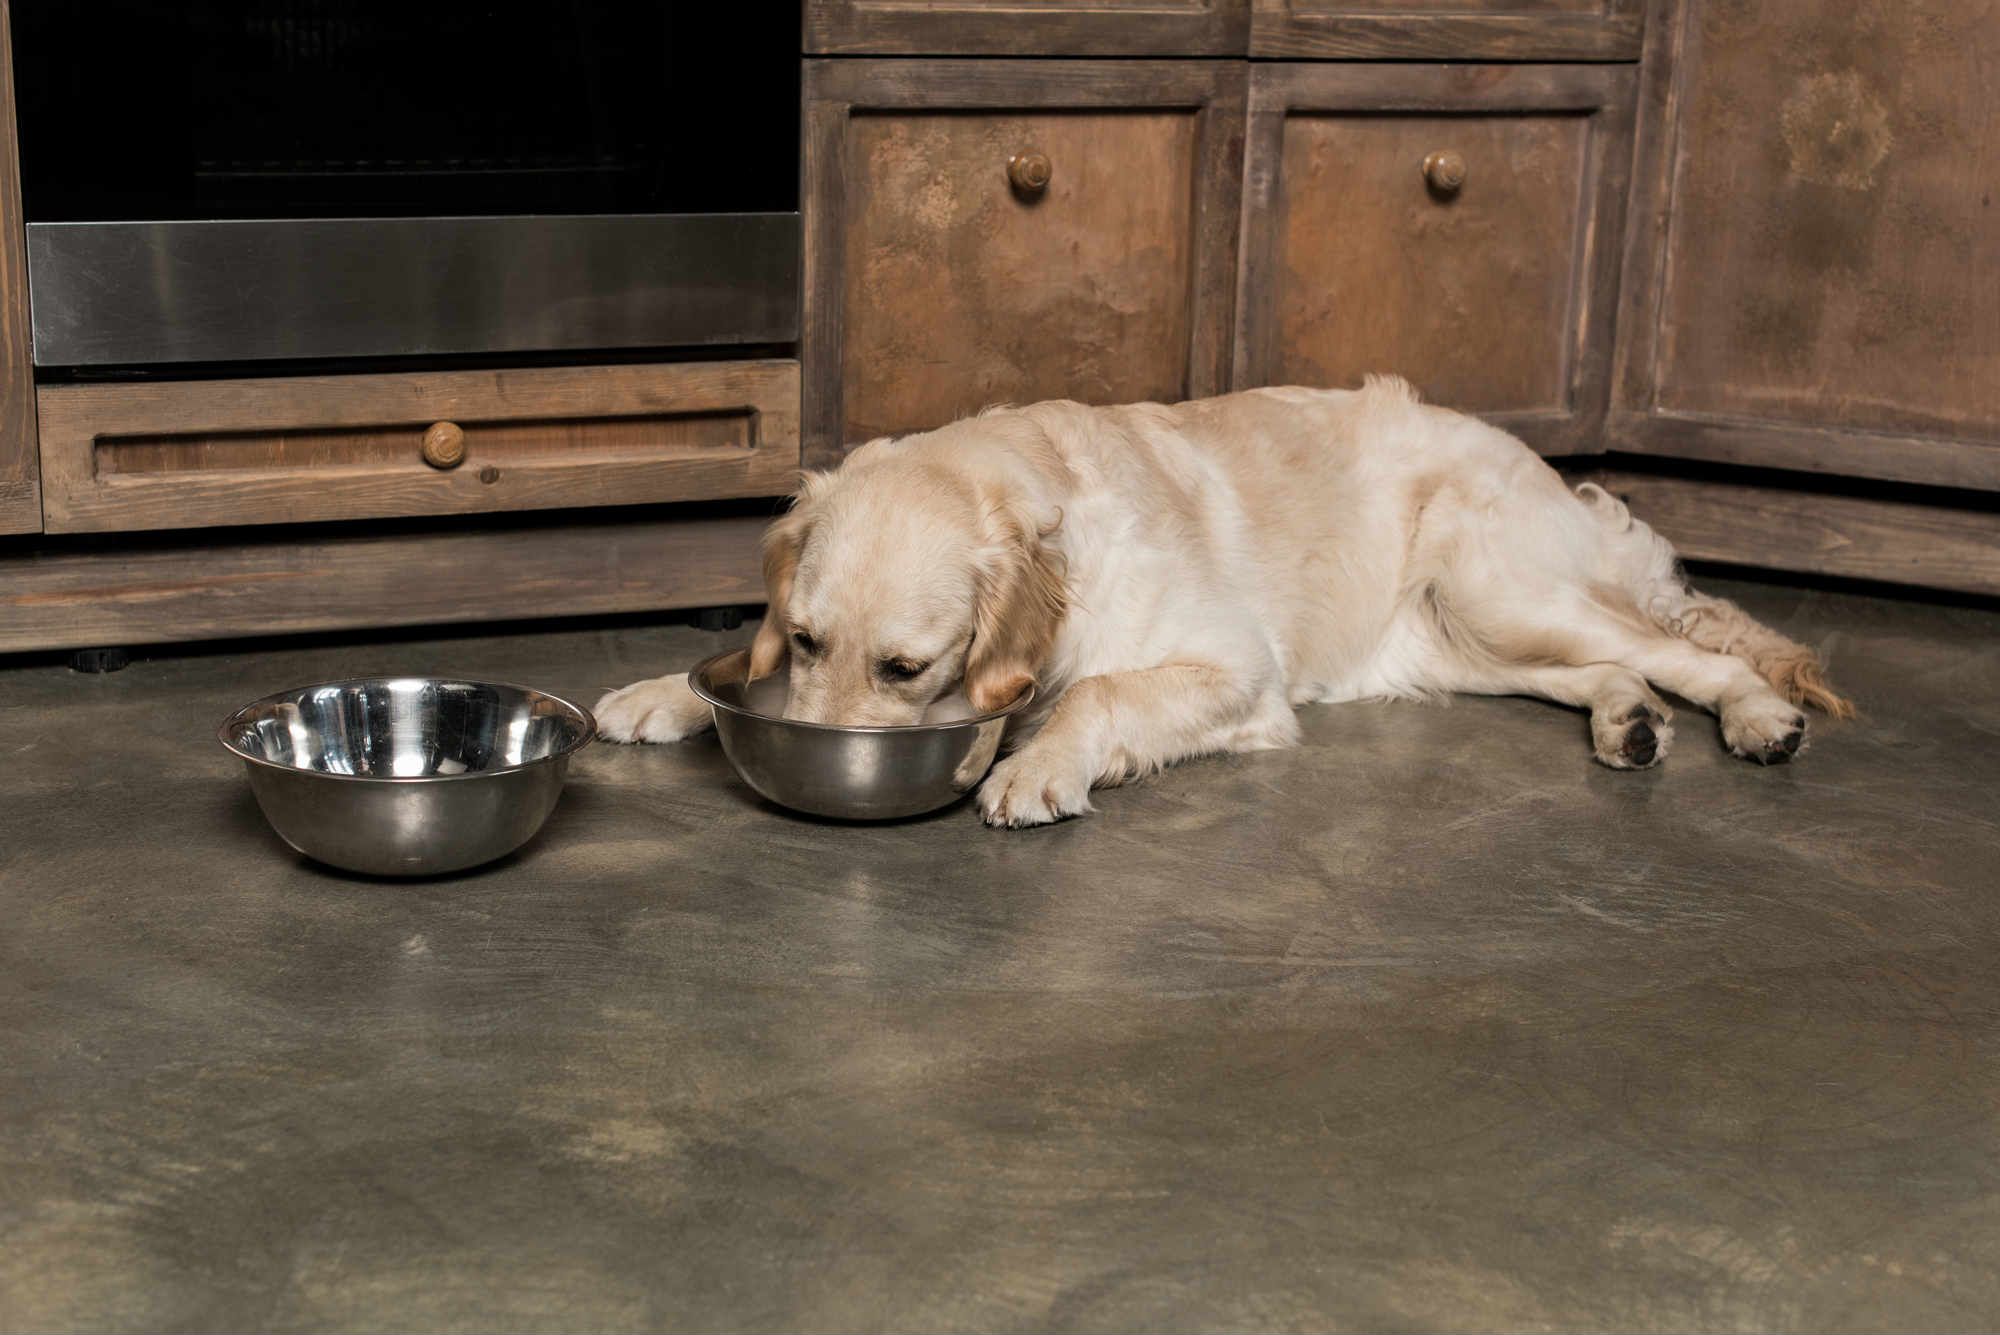 Which Science Diet Dog Food Is Recalled?